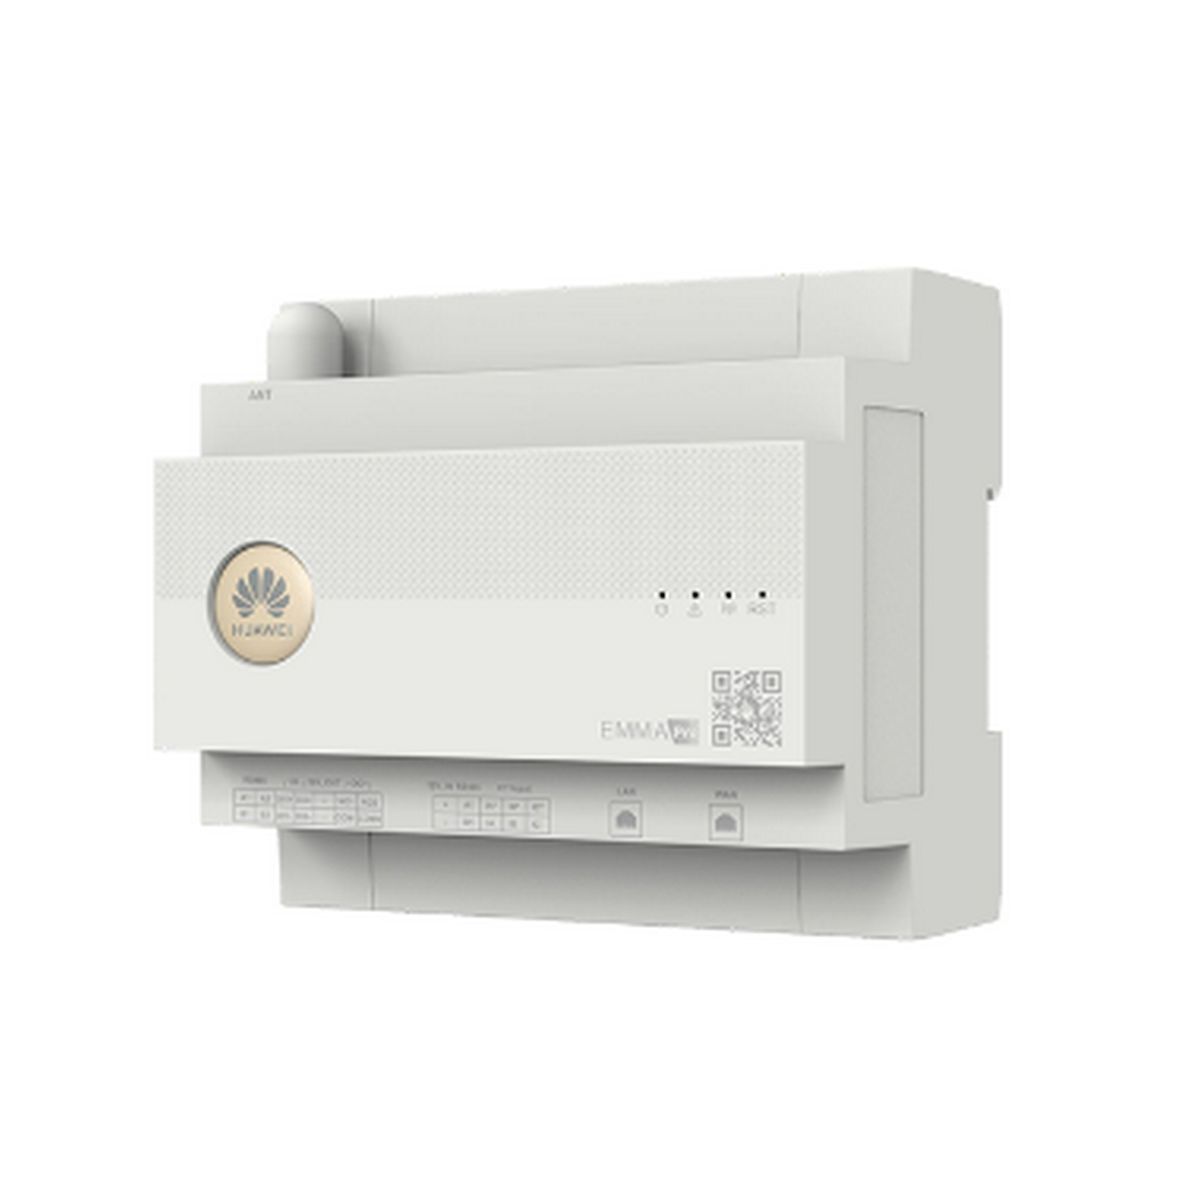 HUAWEI EMMA-A02, Energy Management Assistance